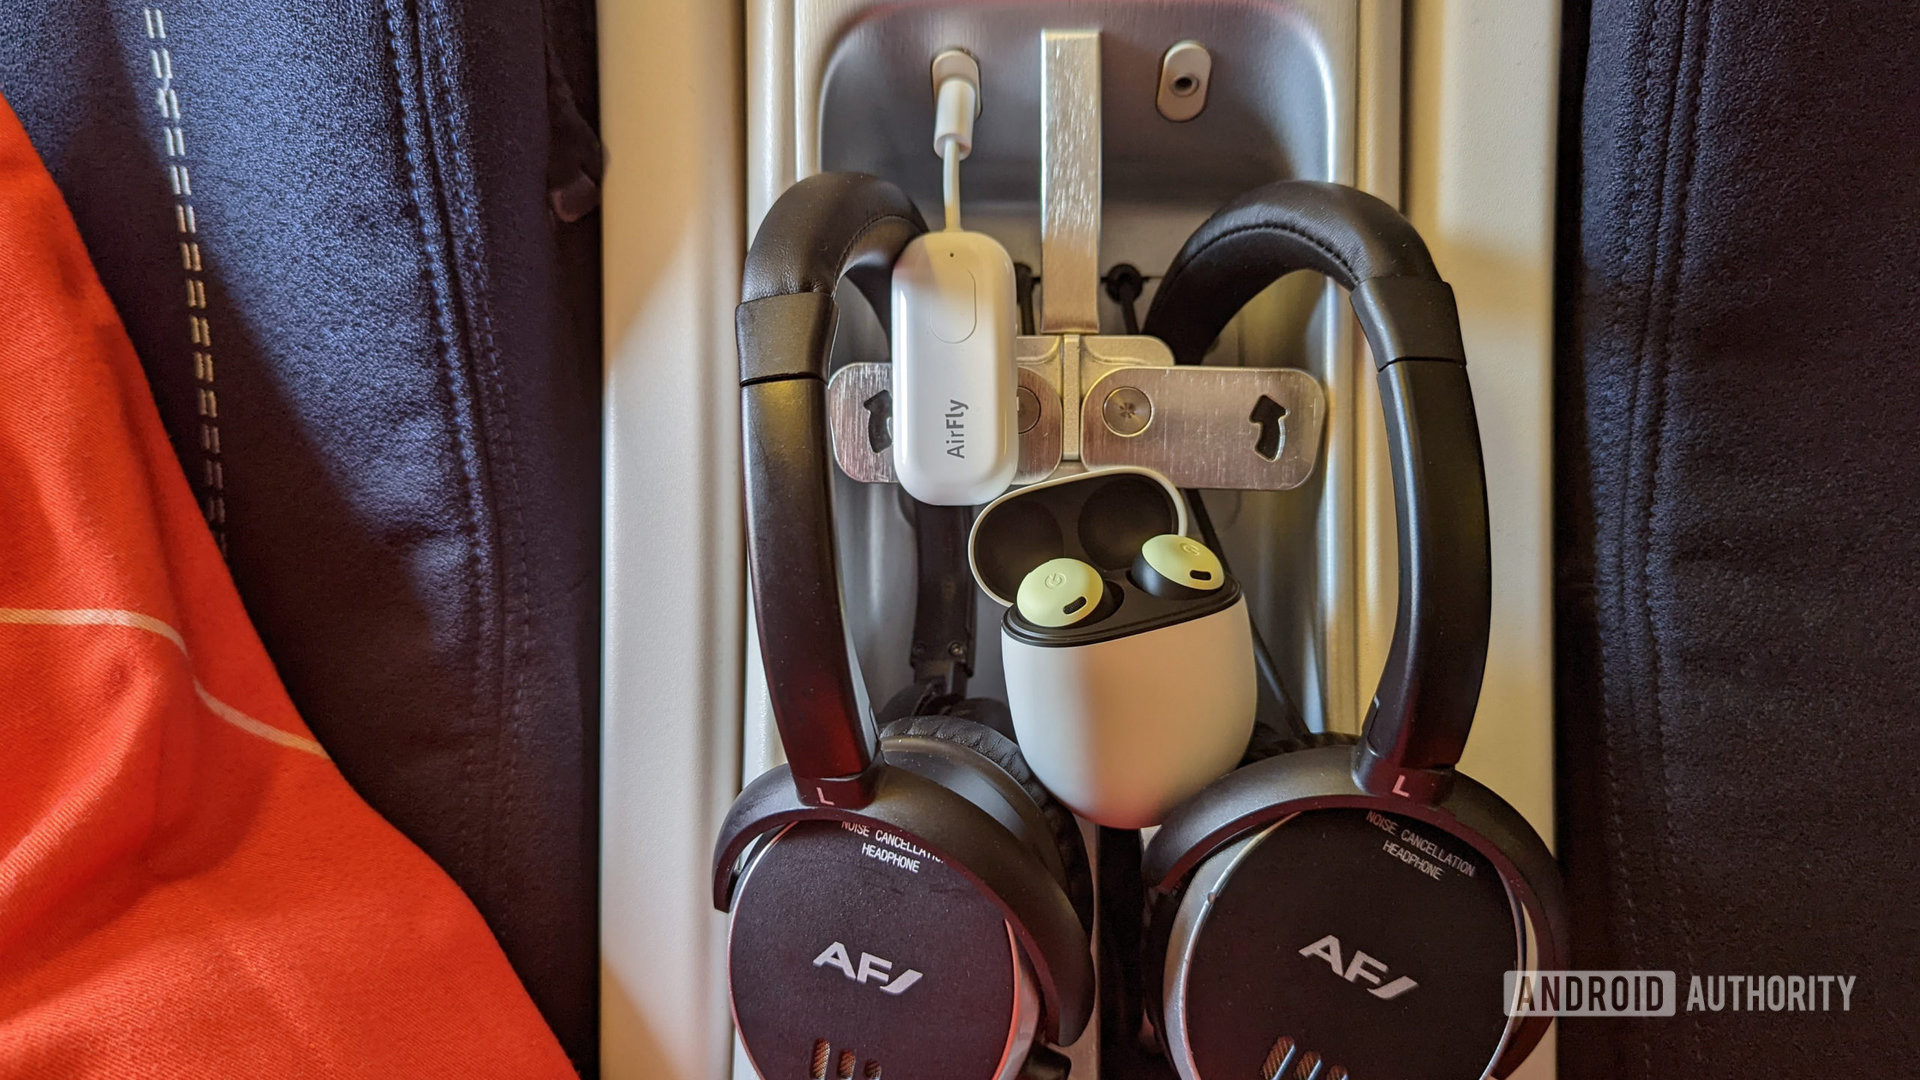 Airfly Pro plugged into the passenger console of an Air France plane with Google Pixel Buds Pro and Air France headphones